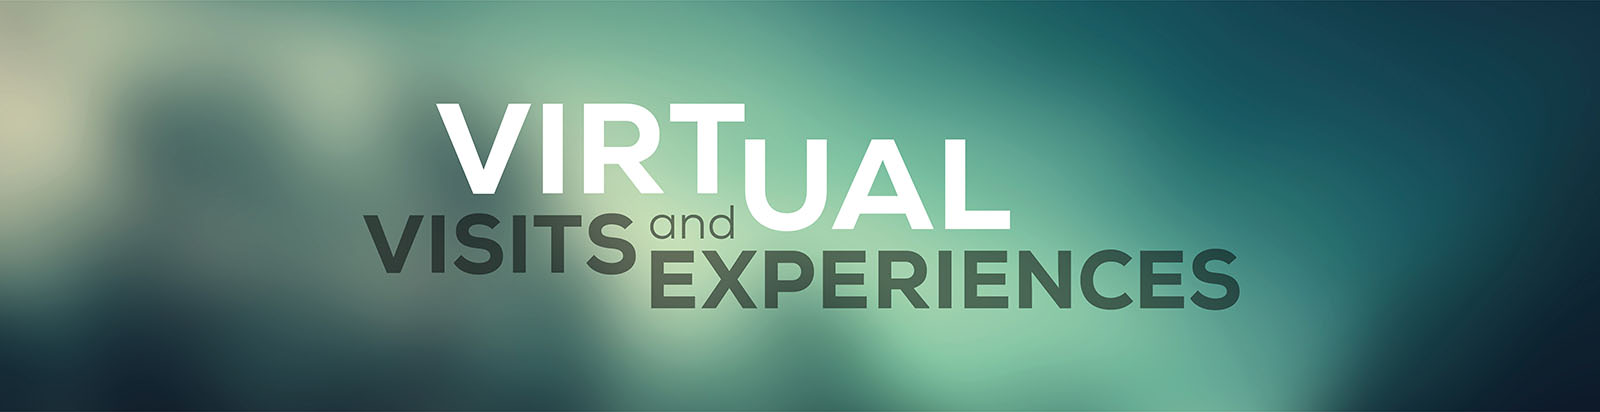 Virtual visits and experiences